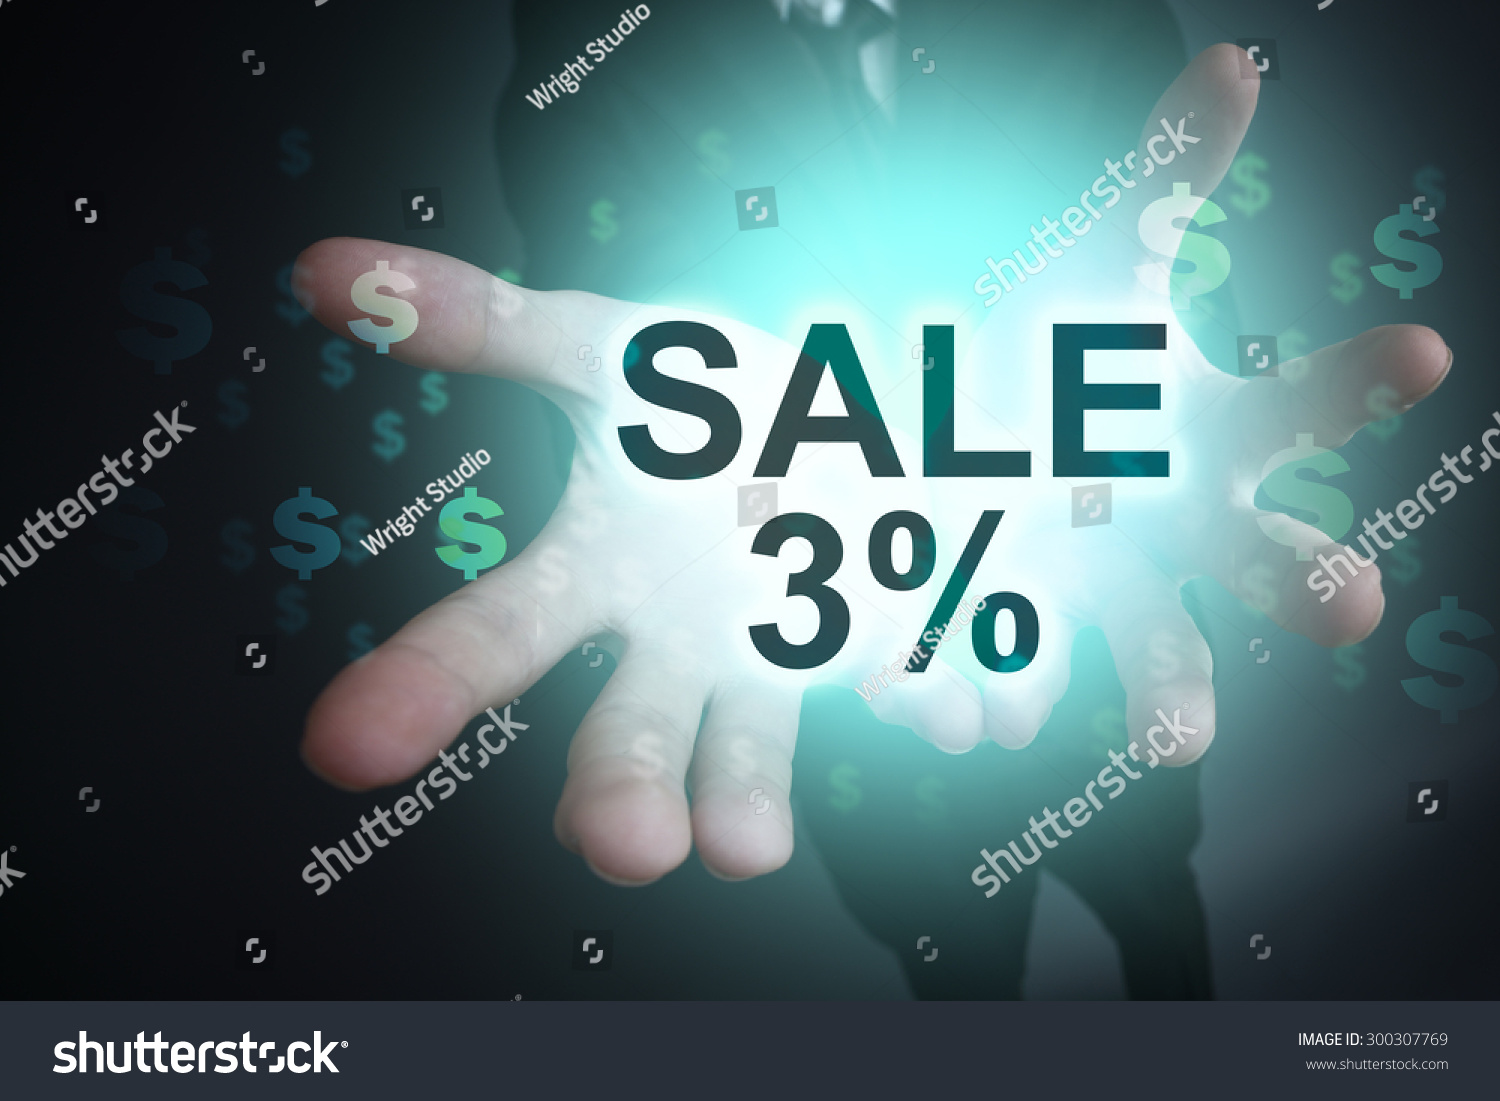 Glowing text "Sale 3%" in the hands of a businessman. Business concept.  #300307769